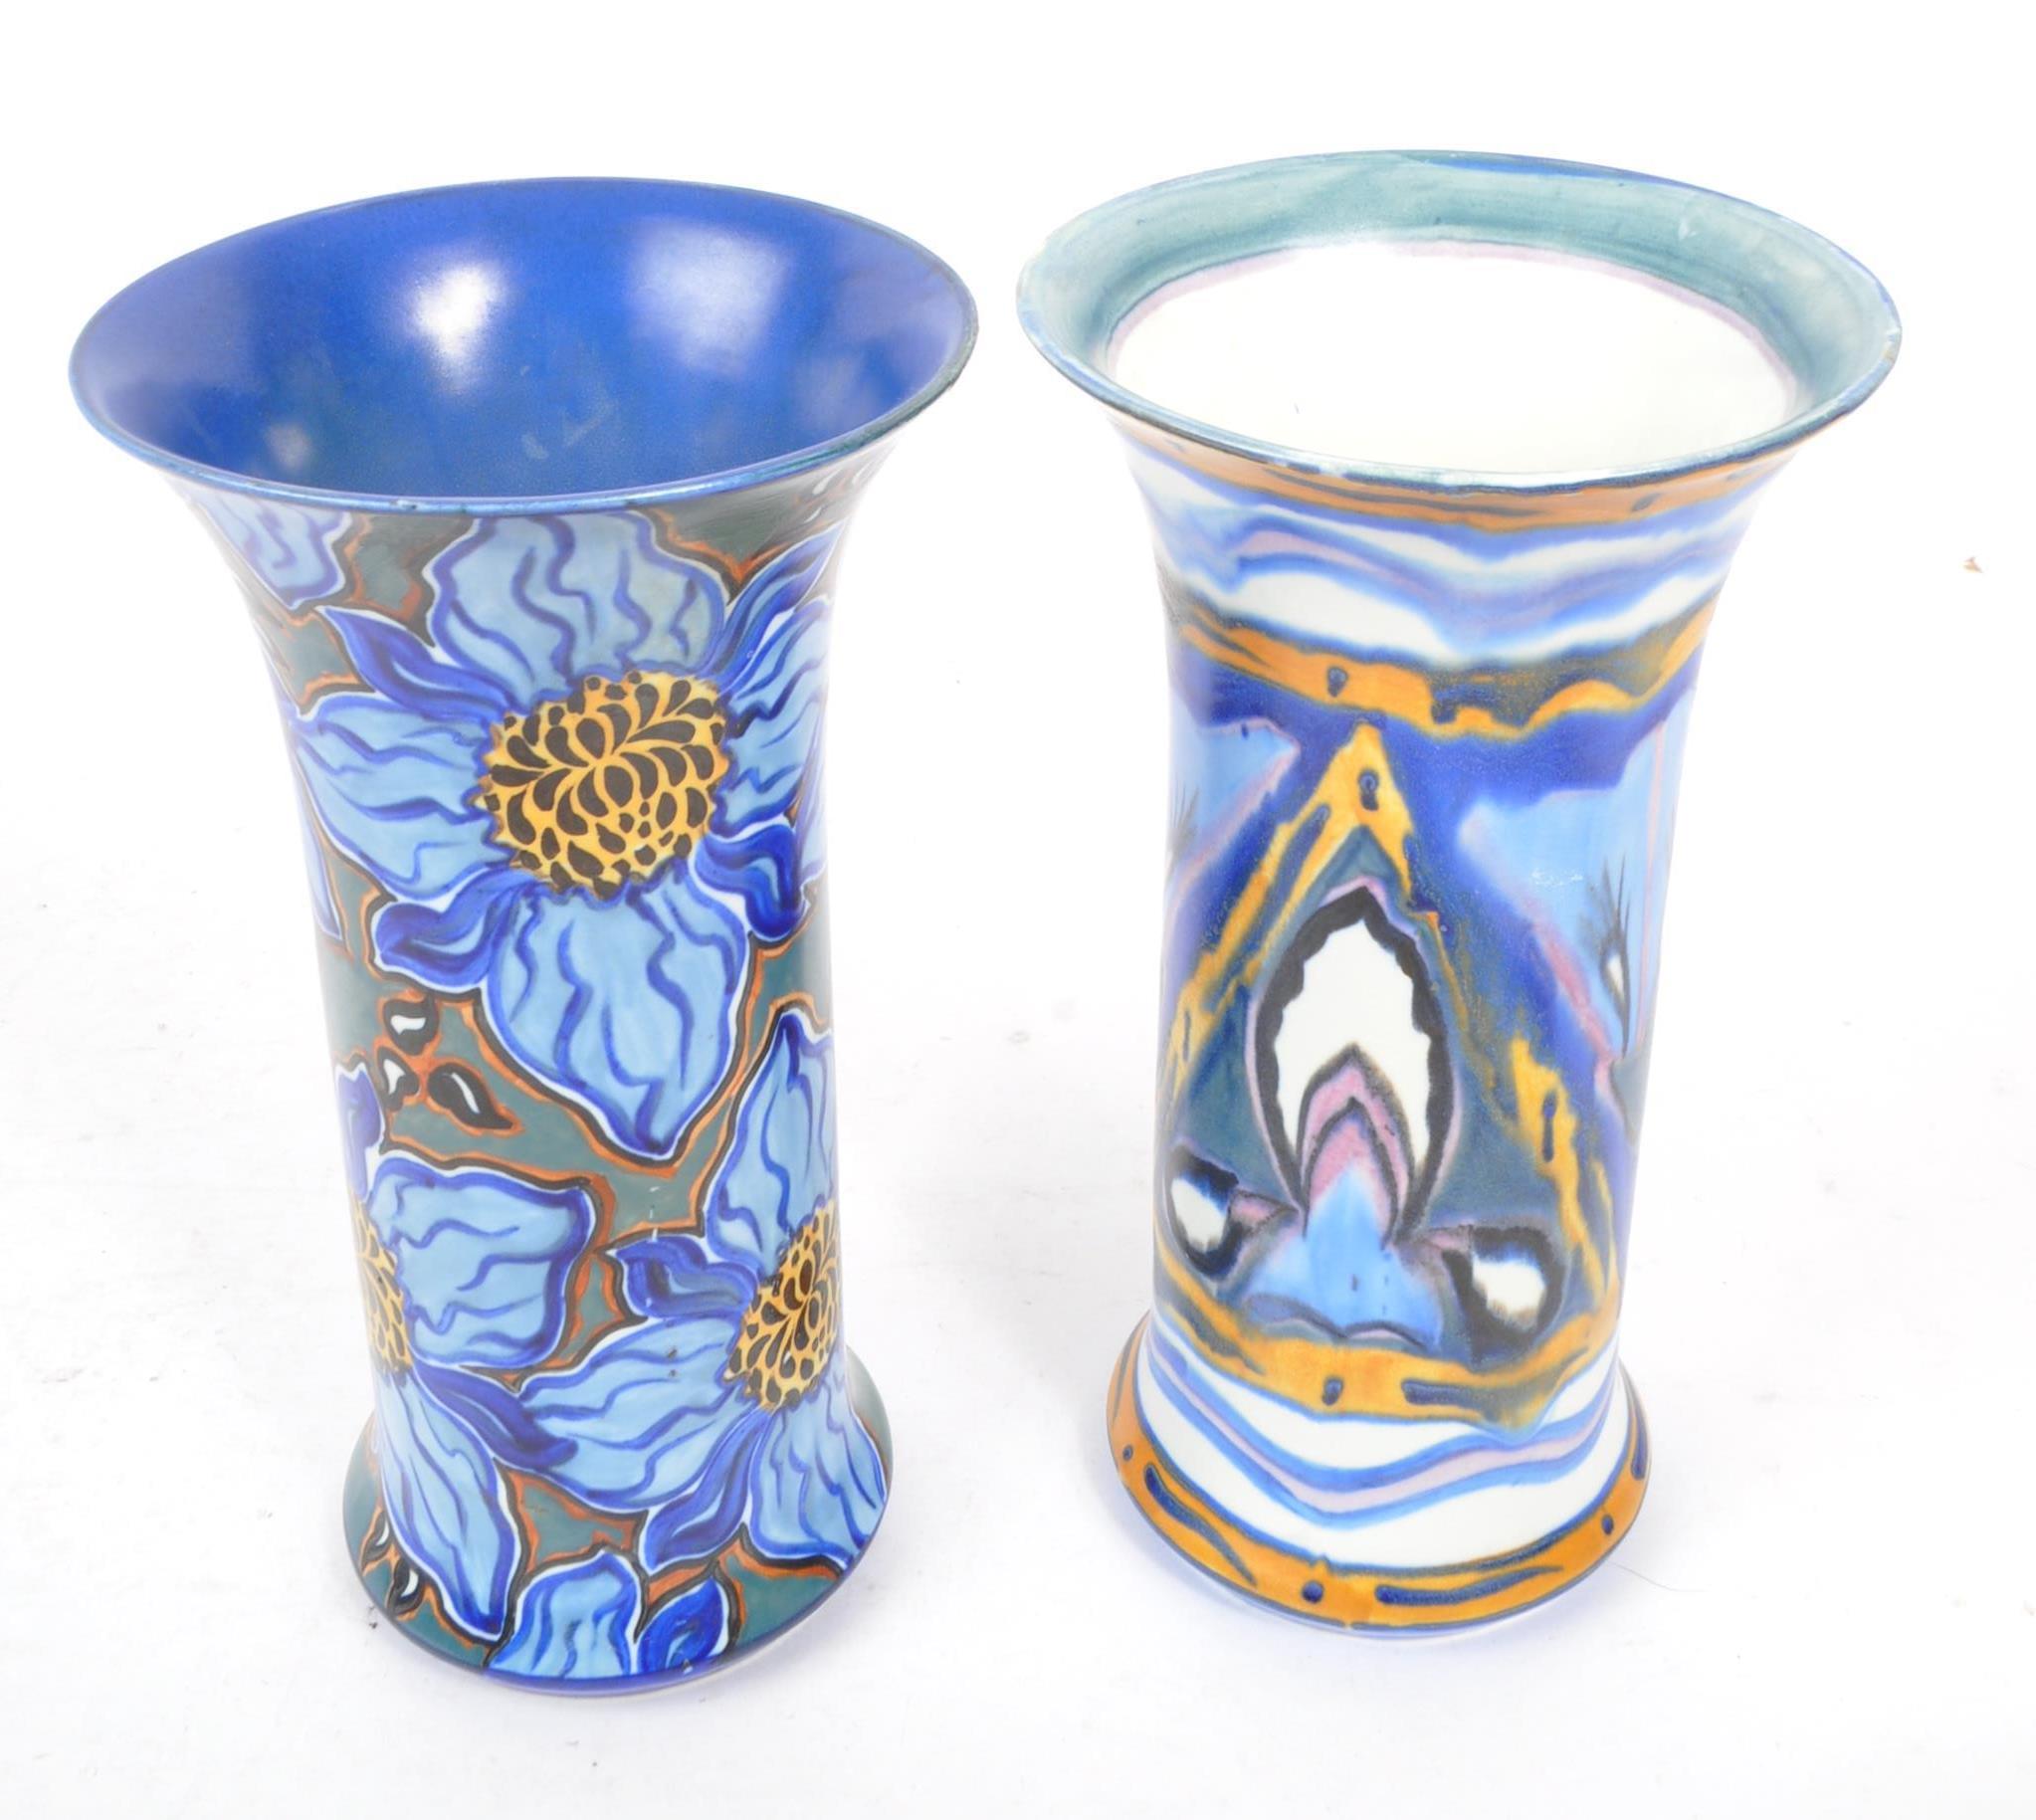 CARLTON WARE - TWO 1930S CERAMIC VIBRANT ABSTRACT VASES - Image 3 of 8